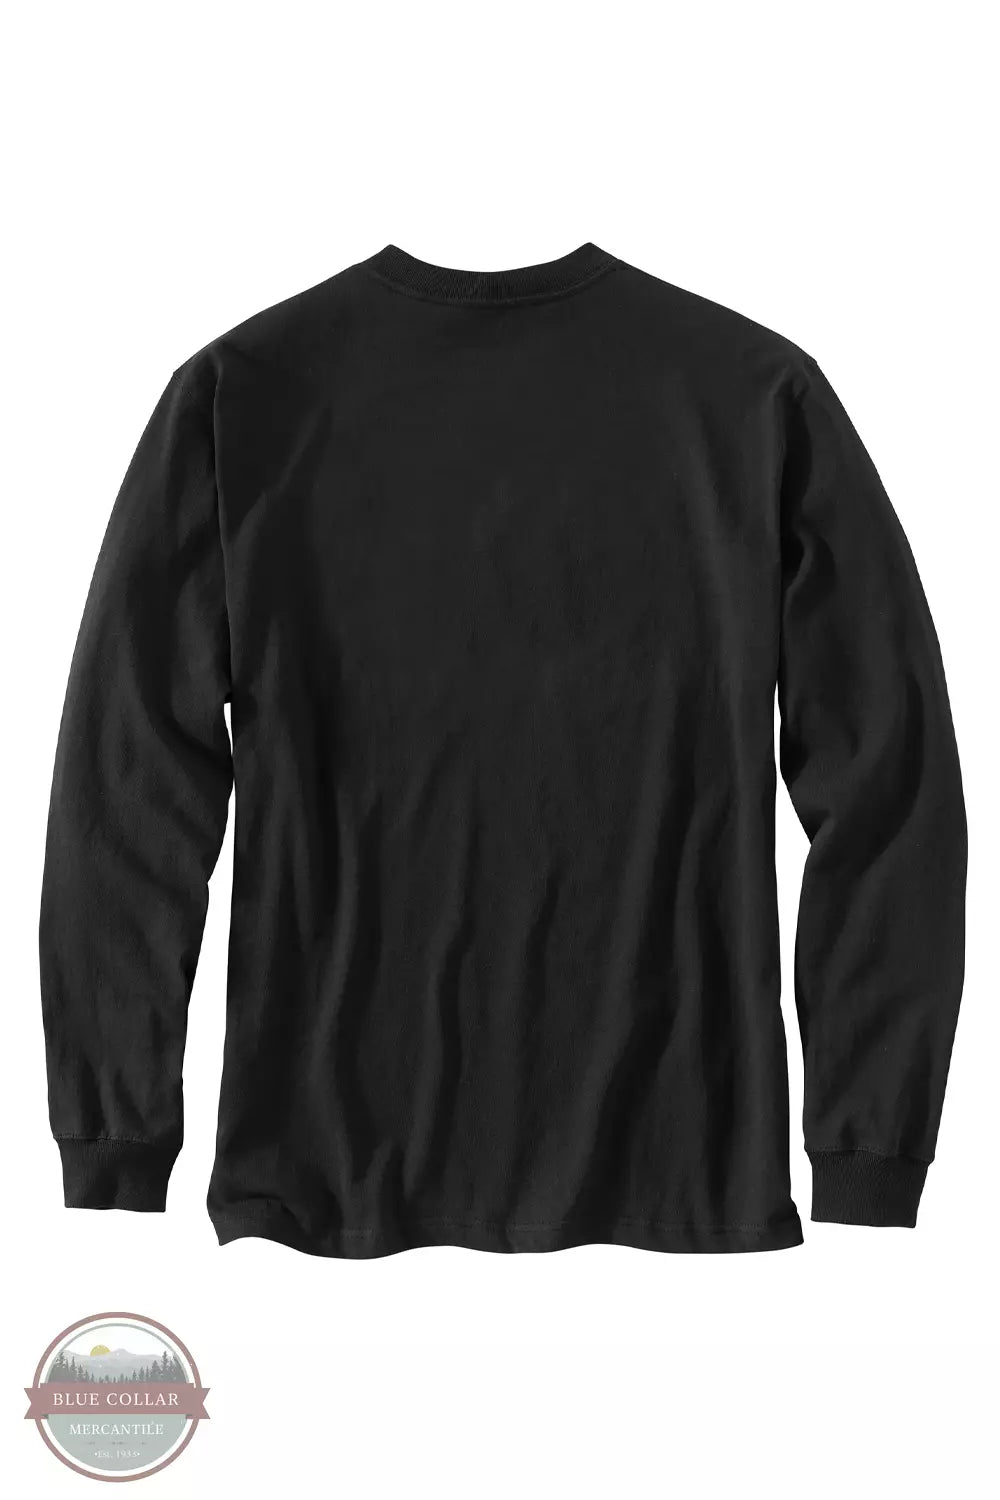 Carhartt 105954 Loose Fit Heavyweight Outlast Graphic Pocket Long Sleeve T-Shirt Black Back View